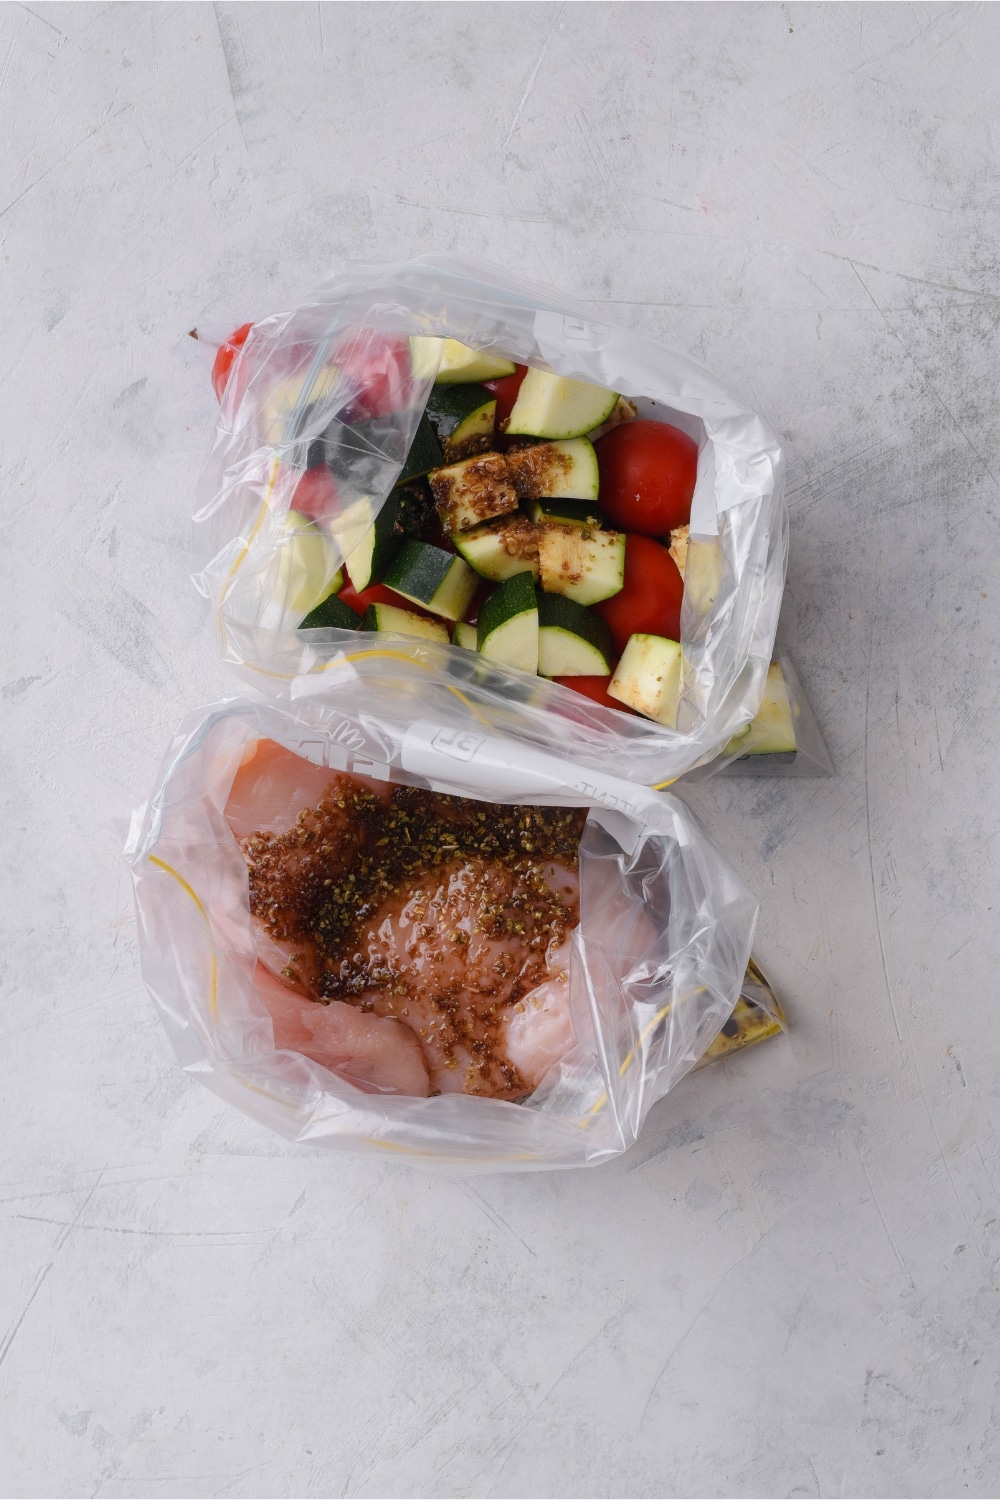 Two plastic bags, one filled with seasoned tomatoes and zucchini, the other filled with seasoned chicken.